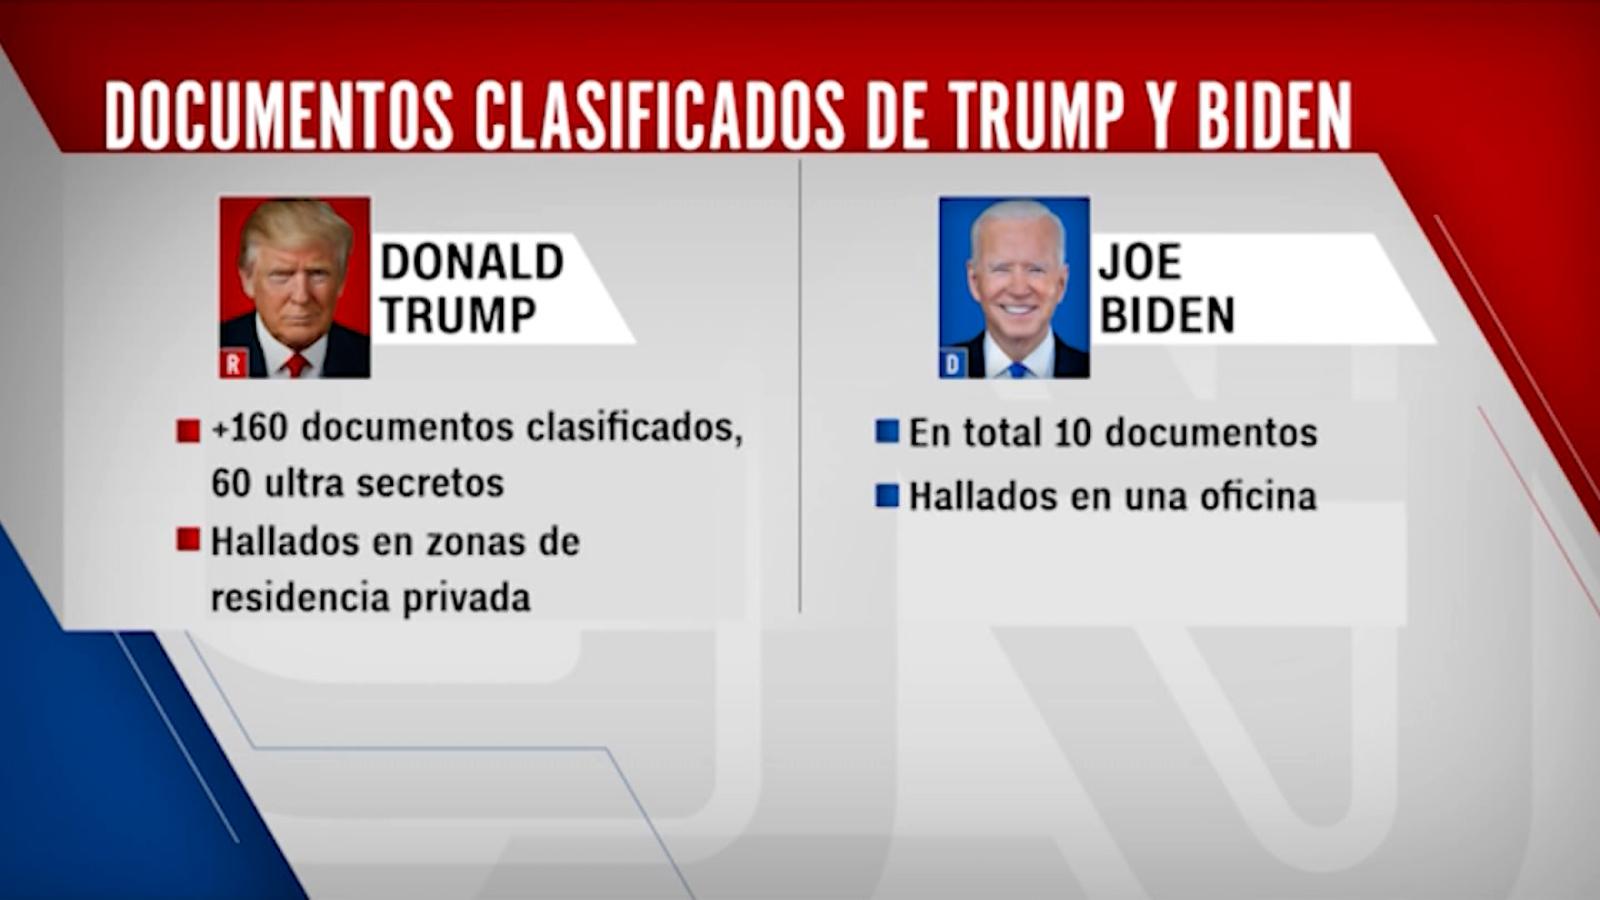 Differences between Biden and Trump's classified documents